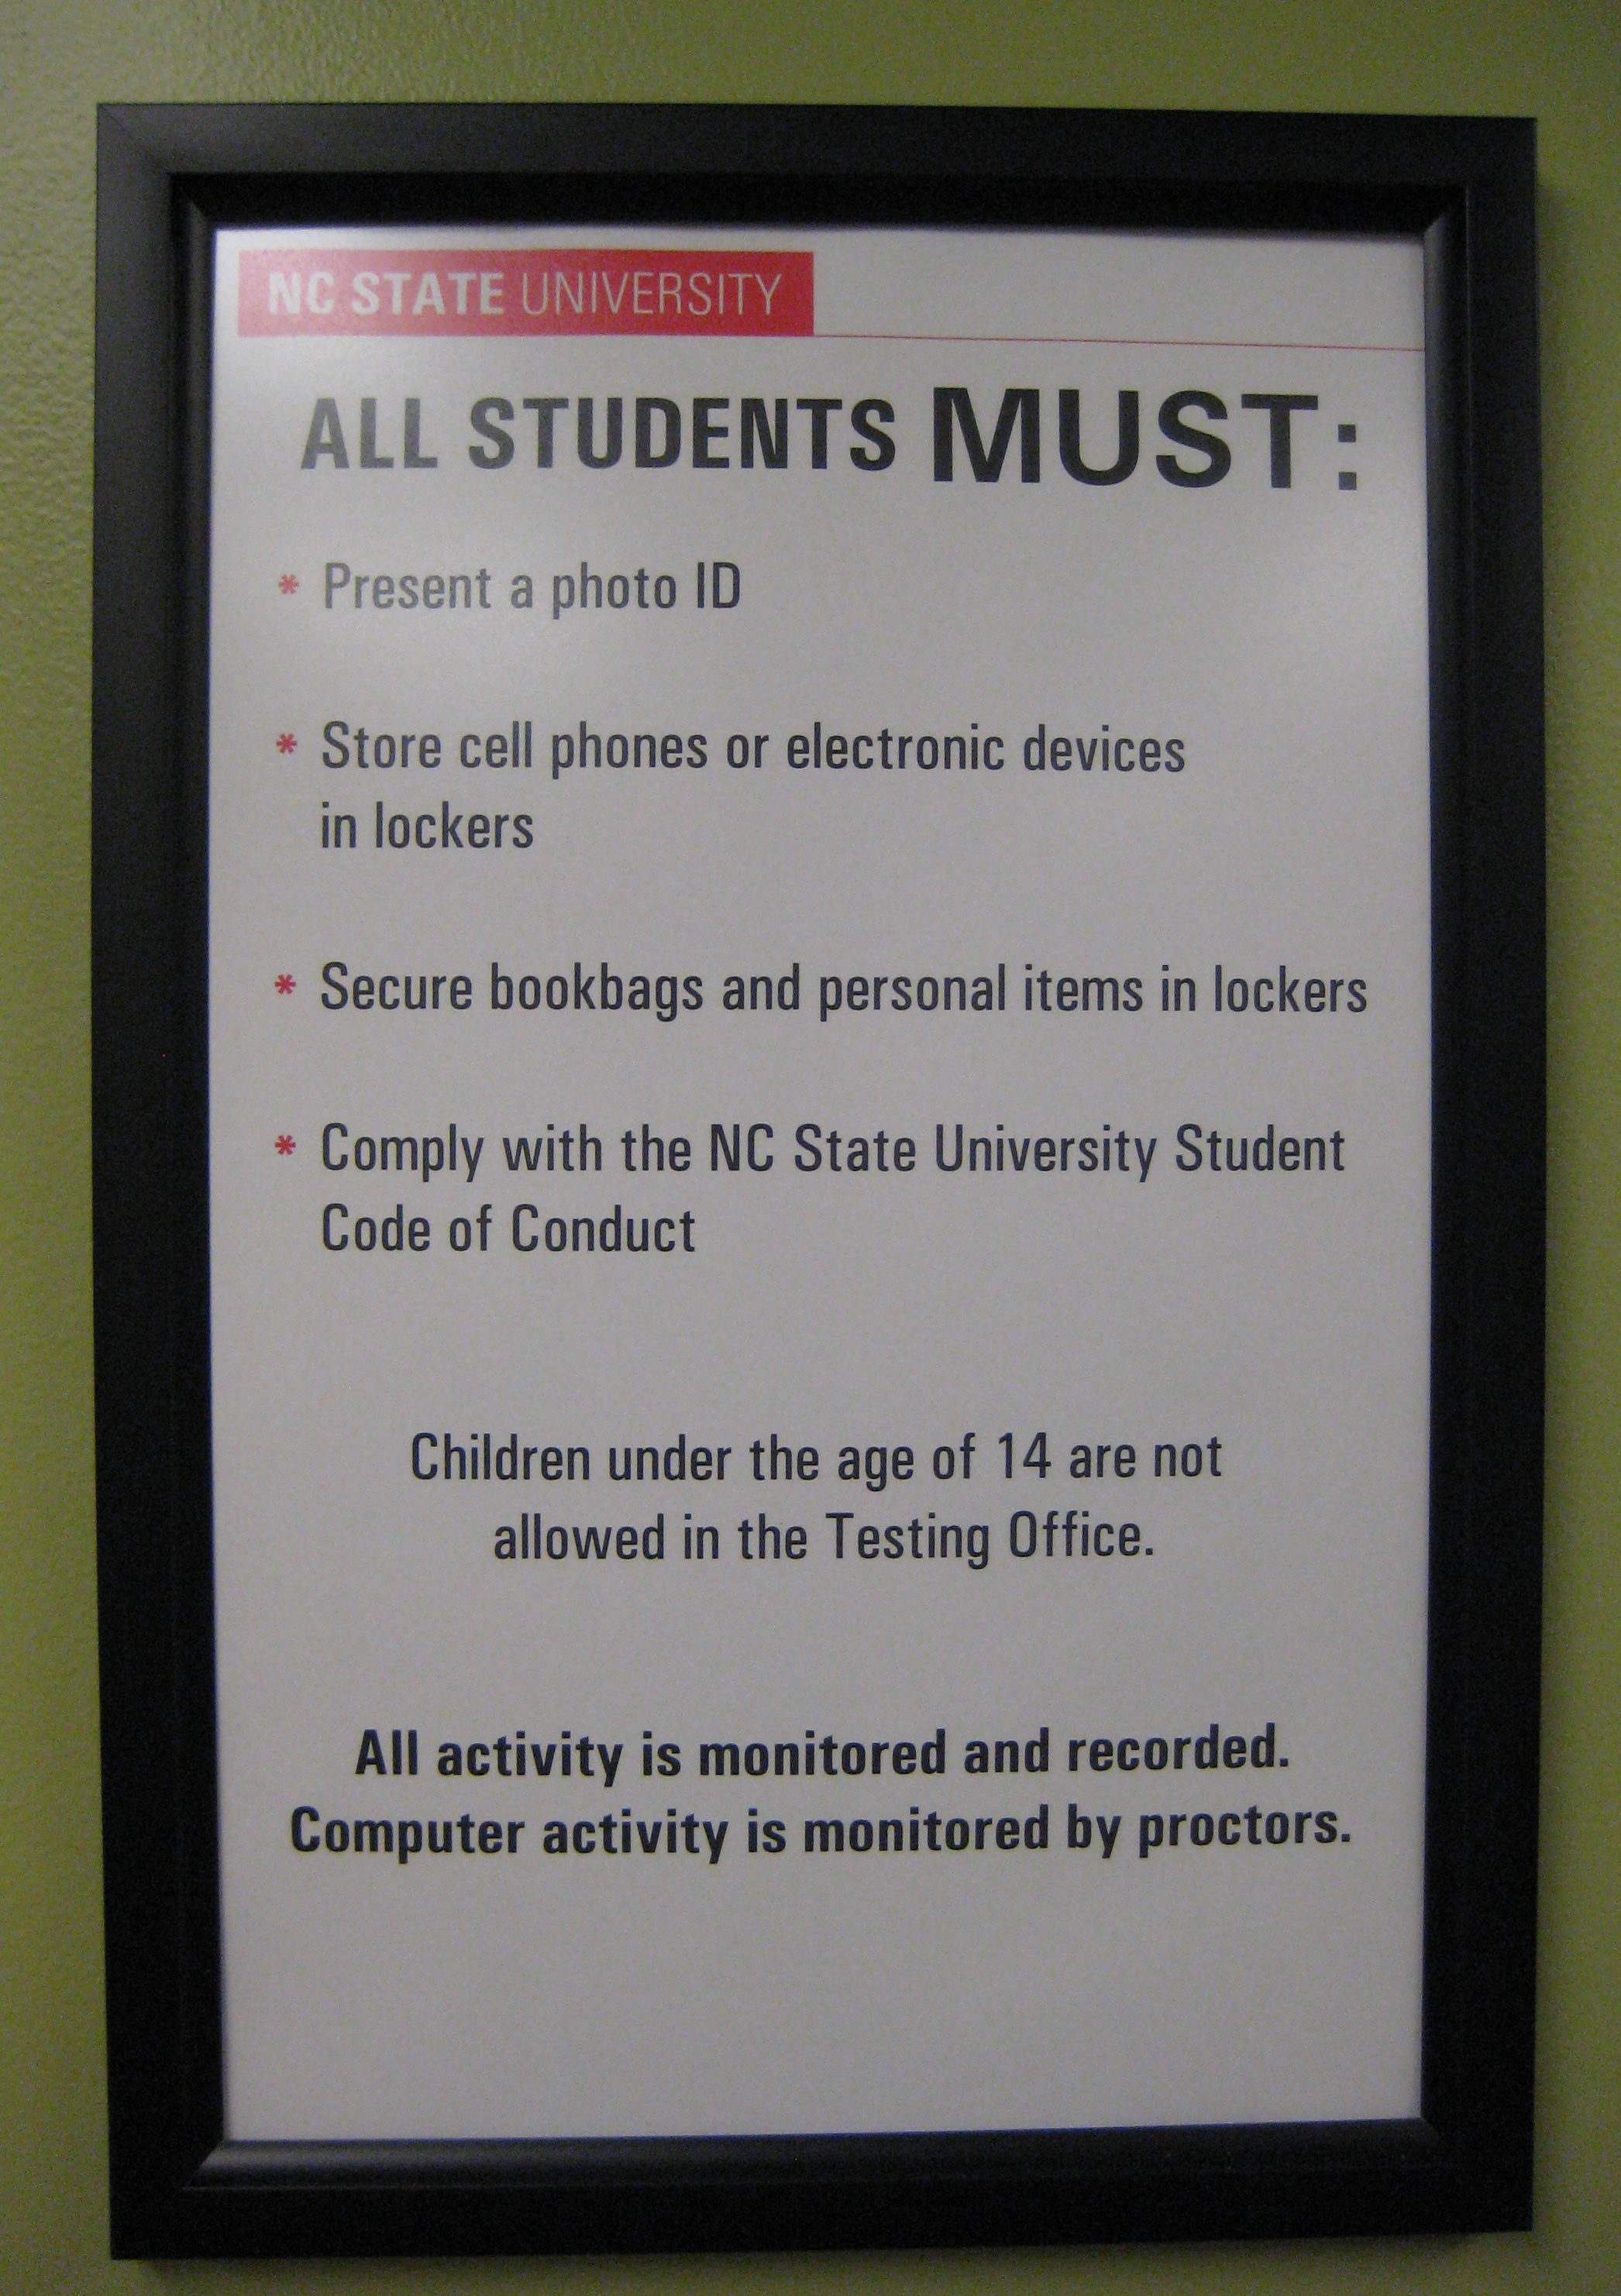 Posted warnings and instructions help ensure the validity of exams.